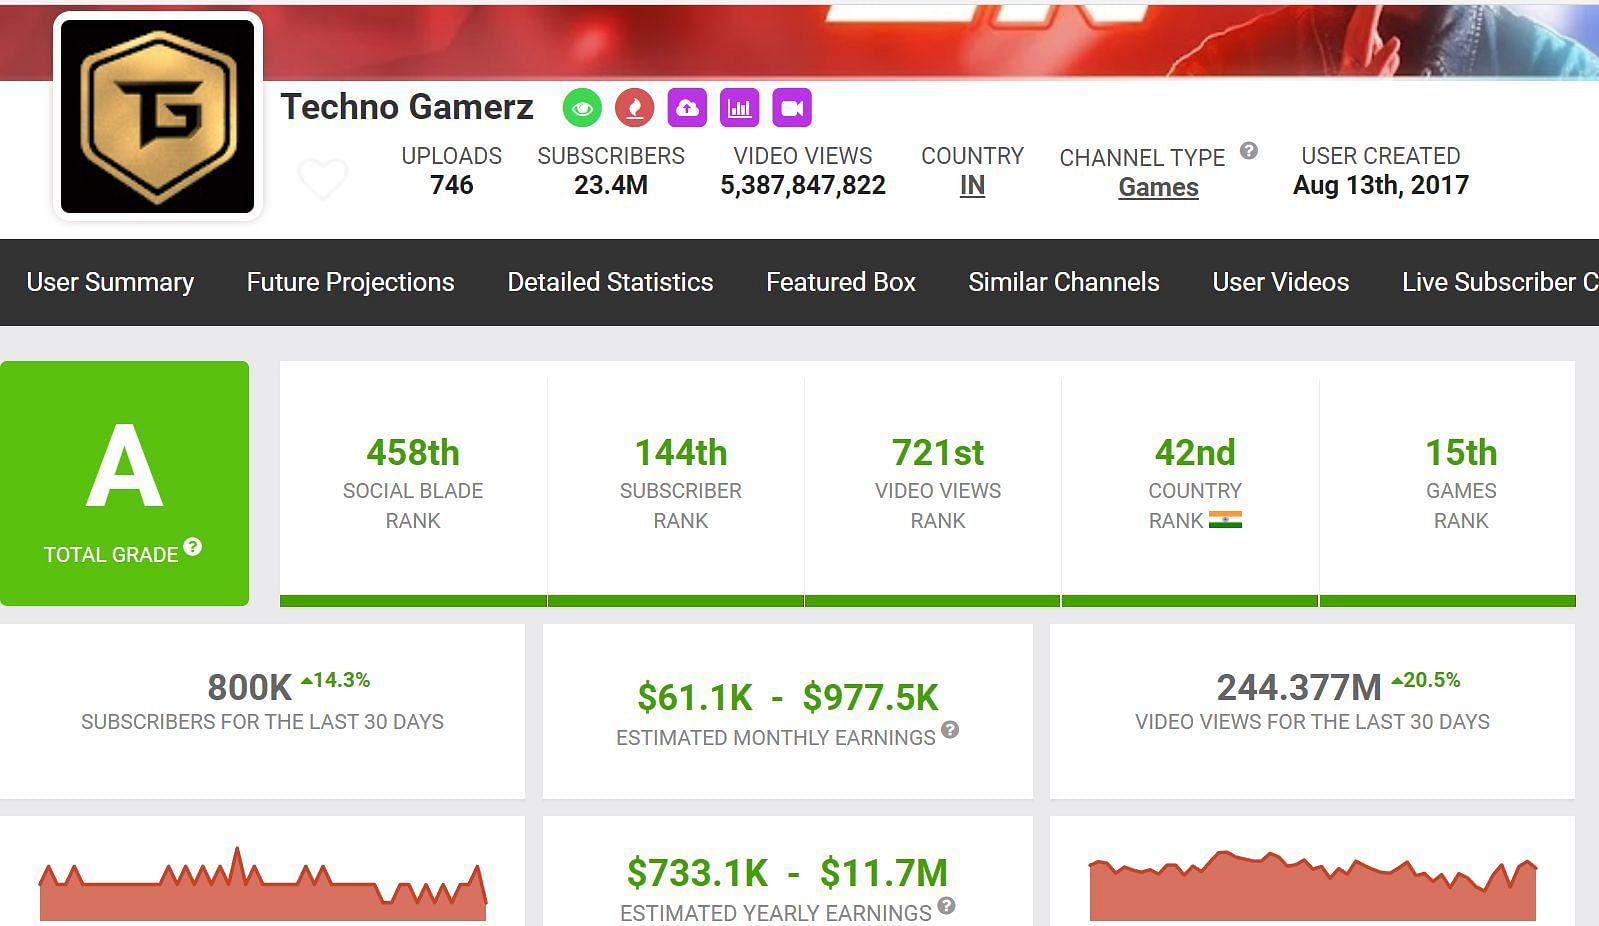 Earnings of Techno Gamerz through his channel (Image via Social Blade)